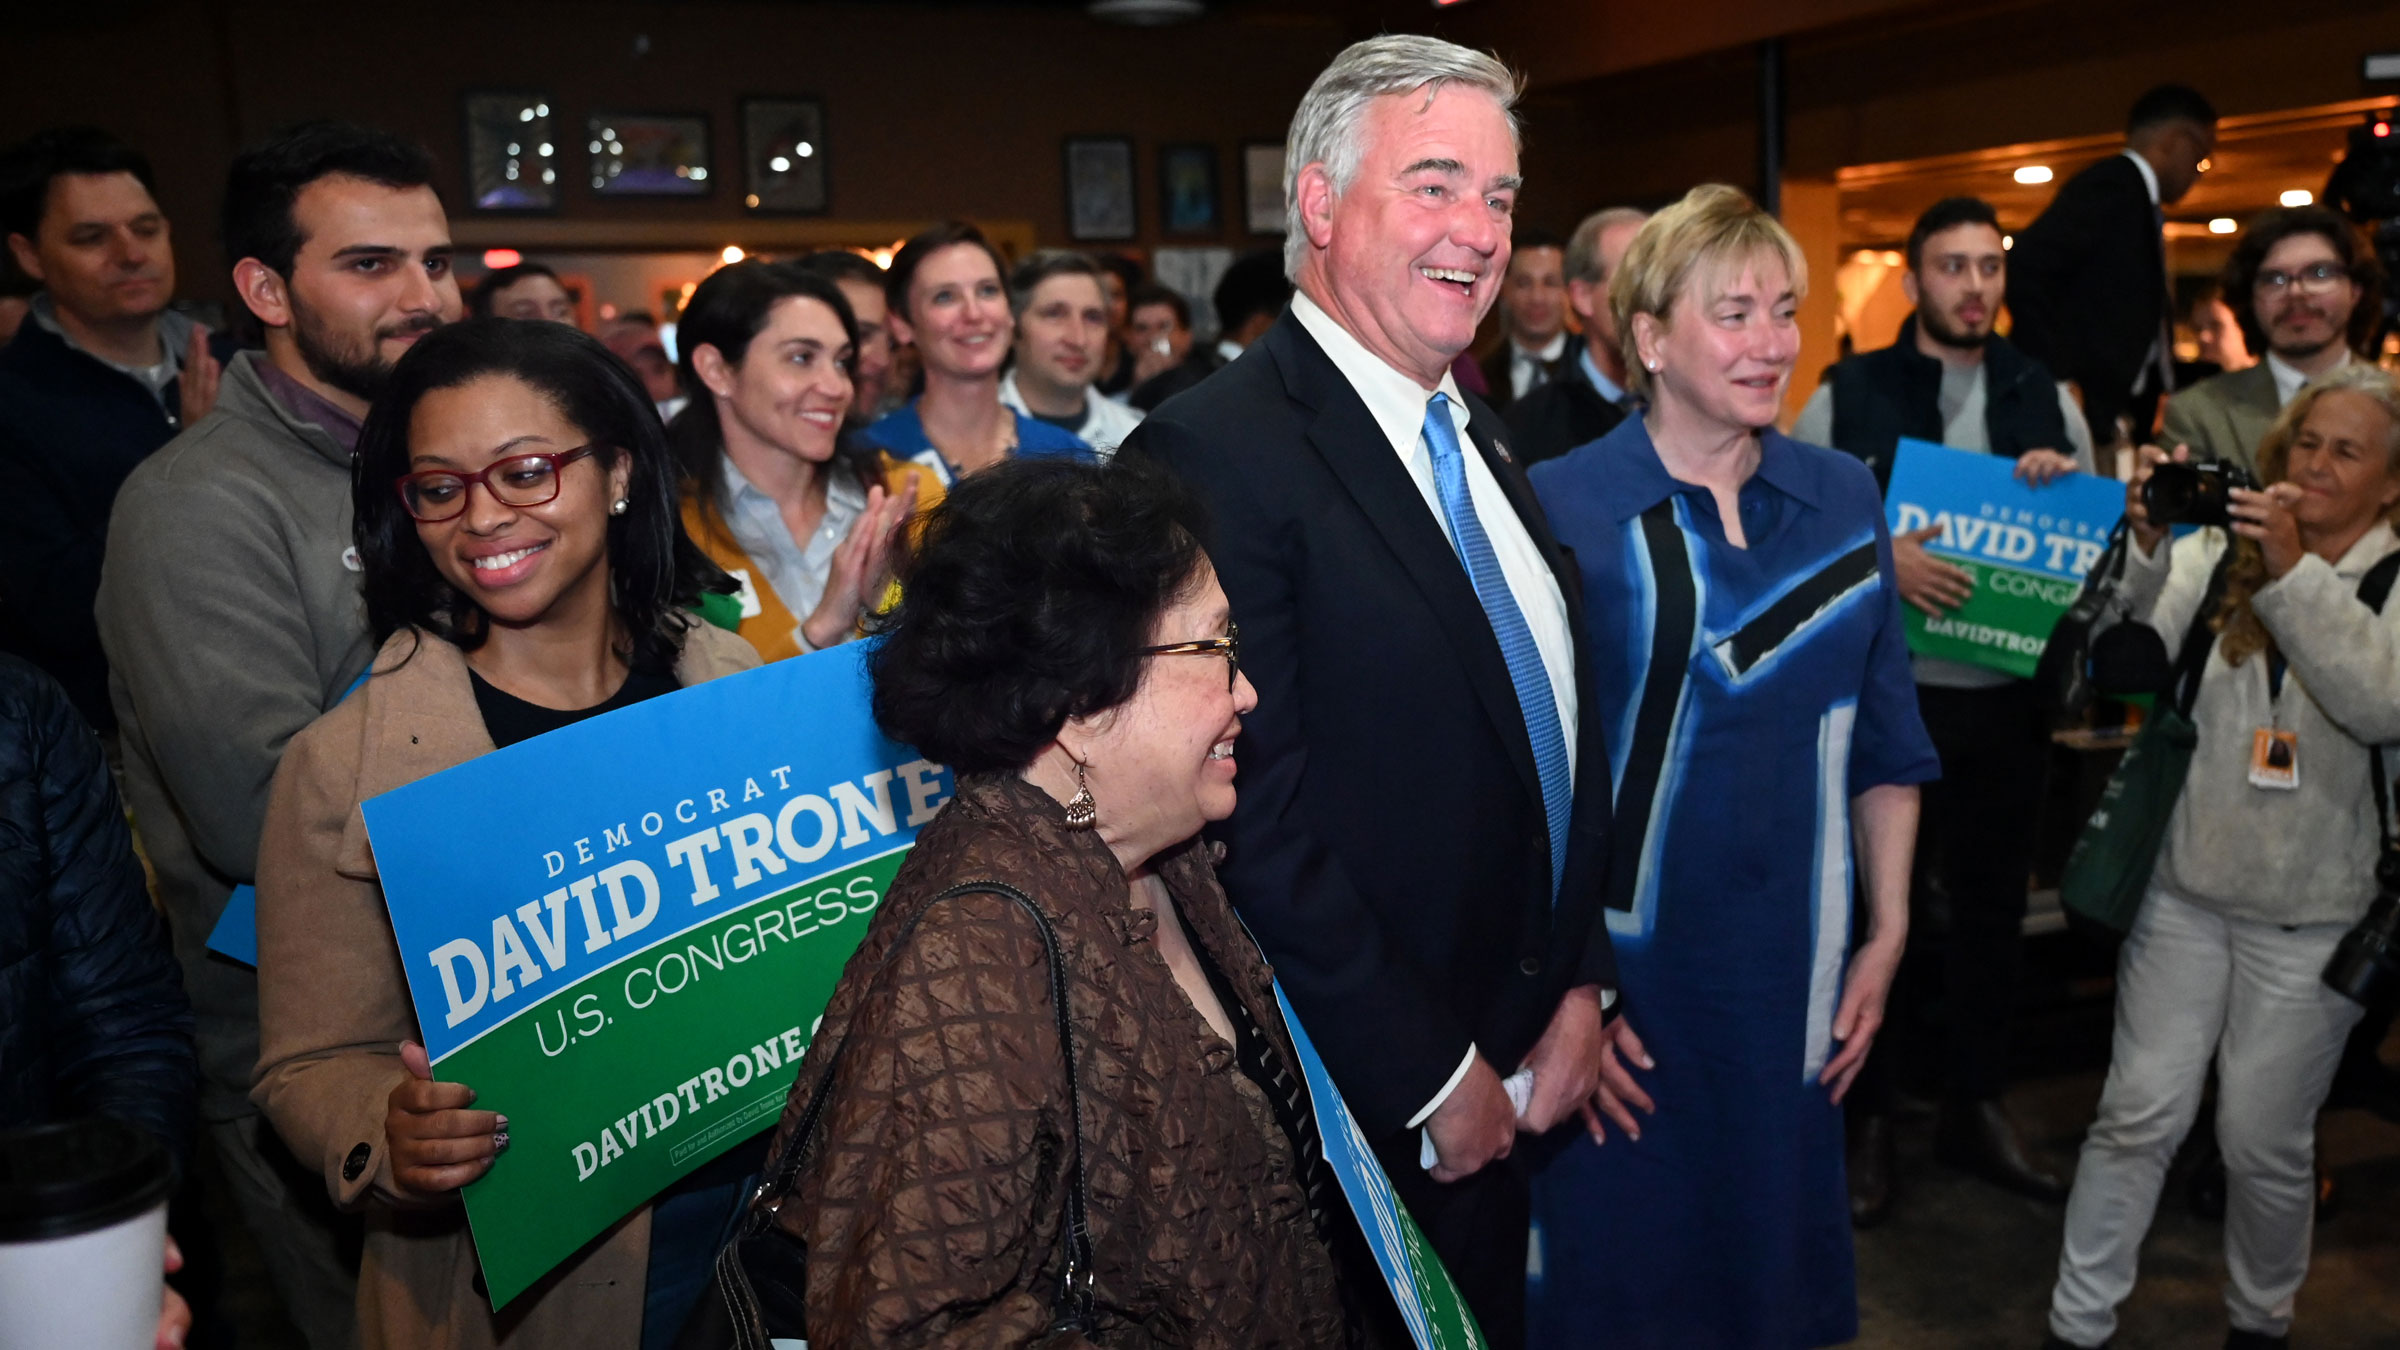 US Rep. David Trone greets supporters at an Election Day event in Frederick, Maryland.